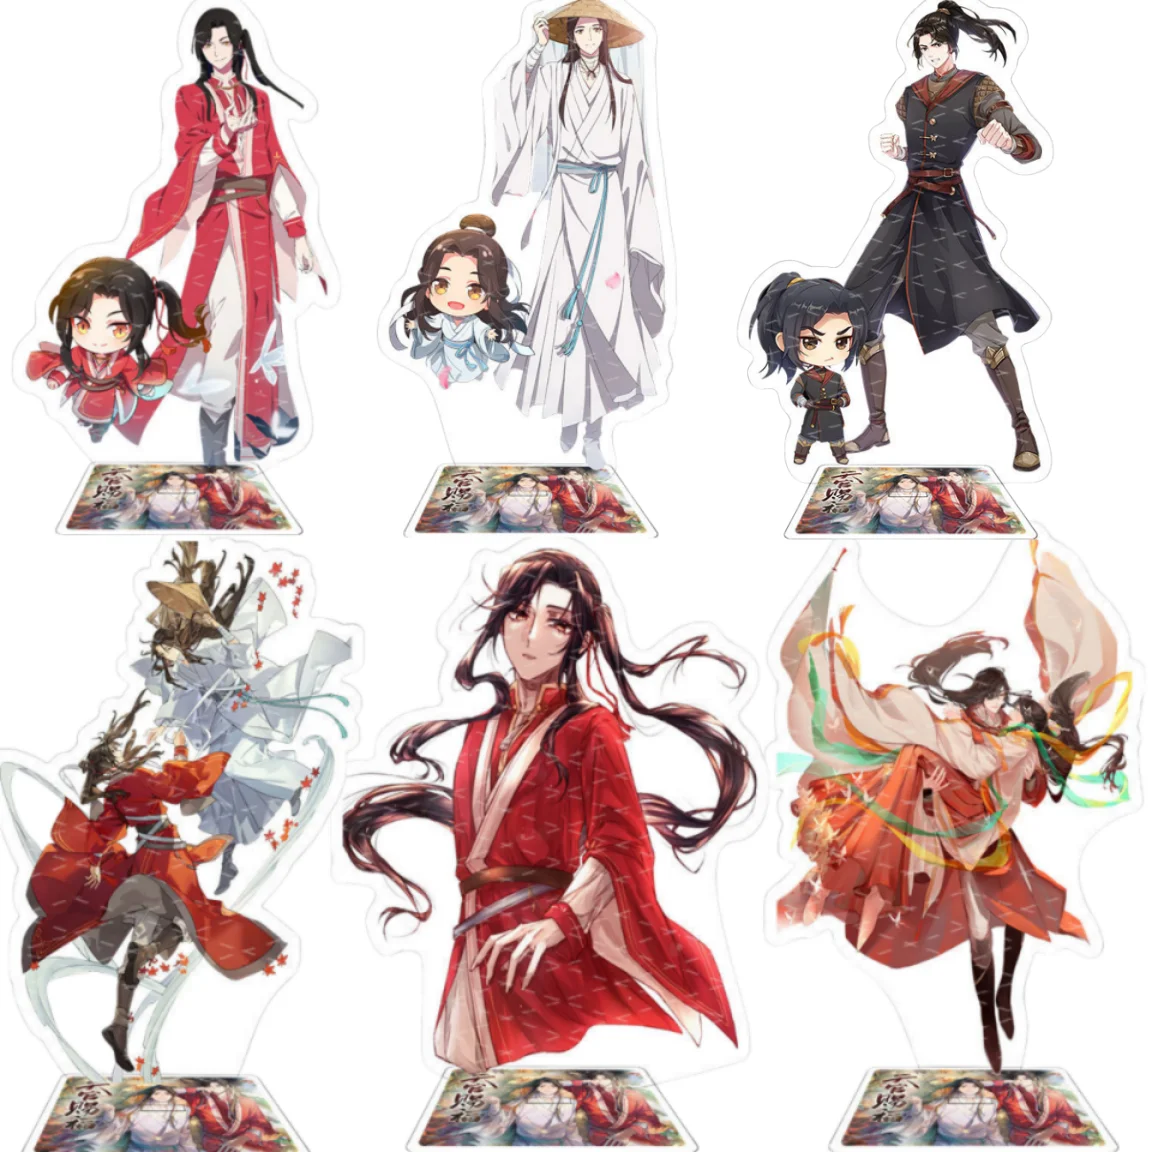 Hot Anime Heavenly God Blesses The People Tian Guan Ci Fu Xie Lian Hua Cheng Acrylic Stand Model Cartoon Figures Fans Gifts 15cm 4 tier acrylic display riser stand for cupcake funko figures display shelf for perfume spice makeup dessert model organiser